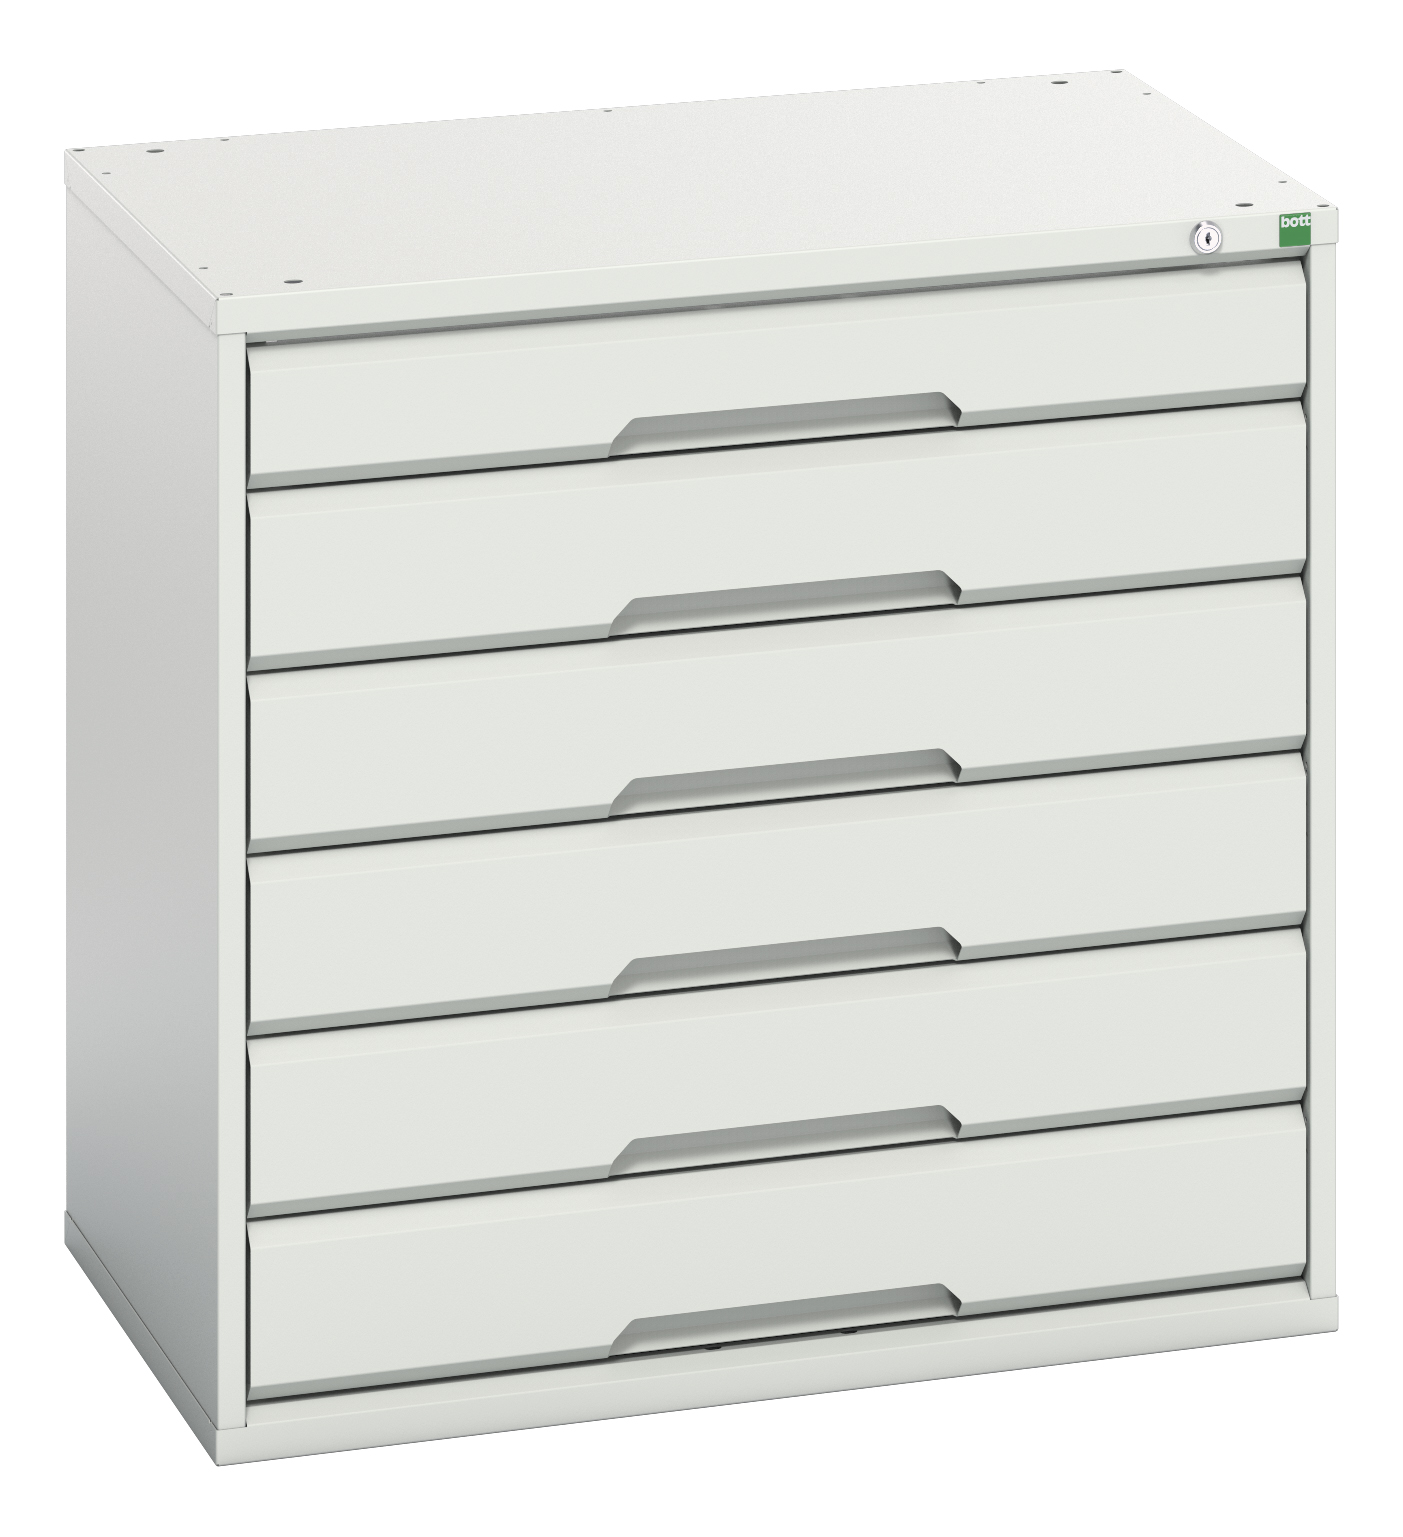 Bott Verso Drawer Cabinet With 6 Drawers - 16925114.16